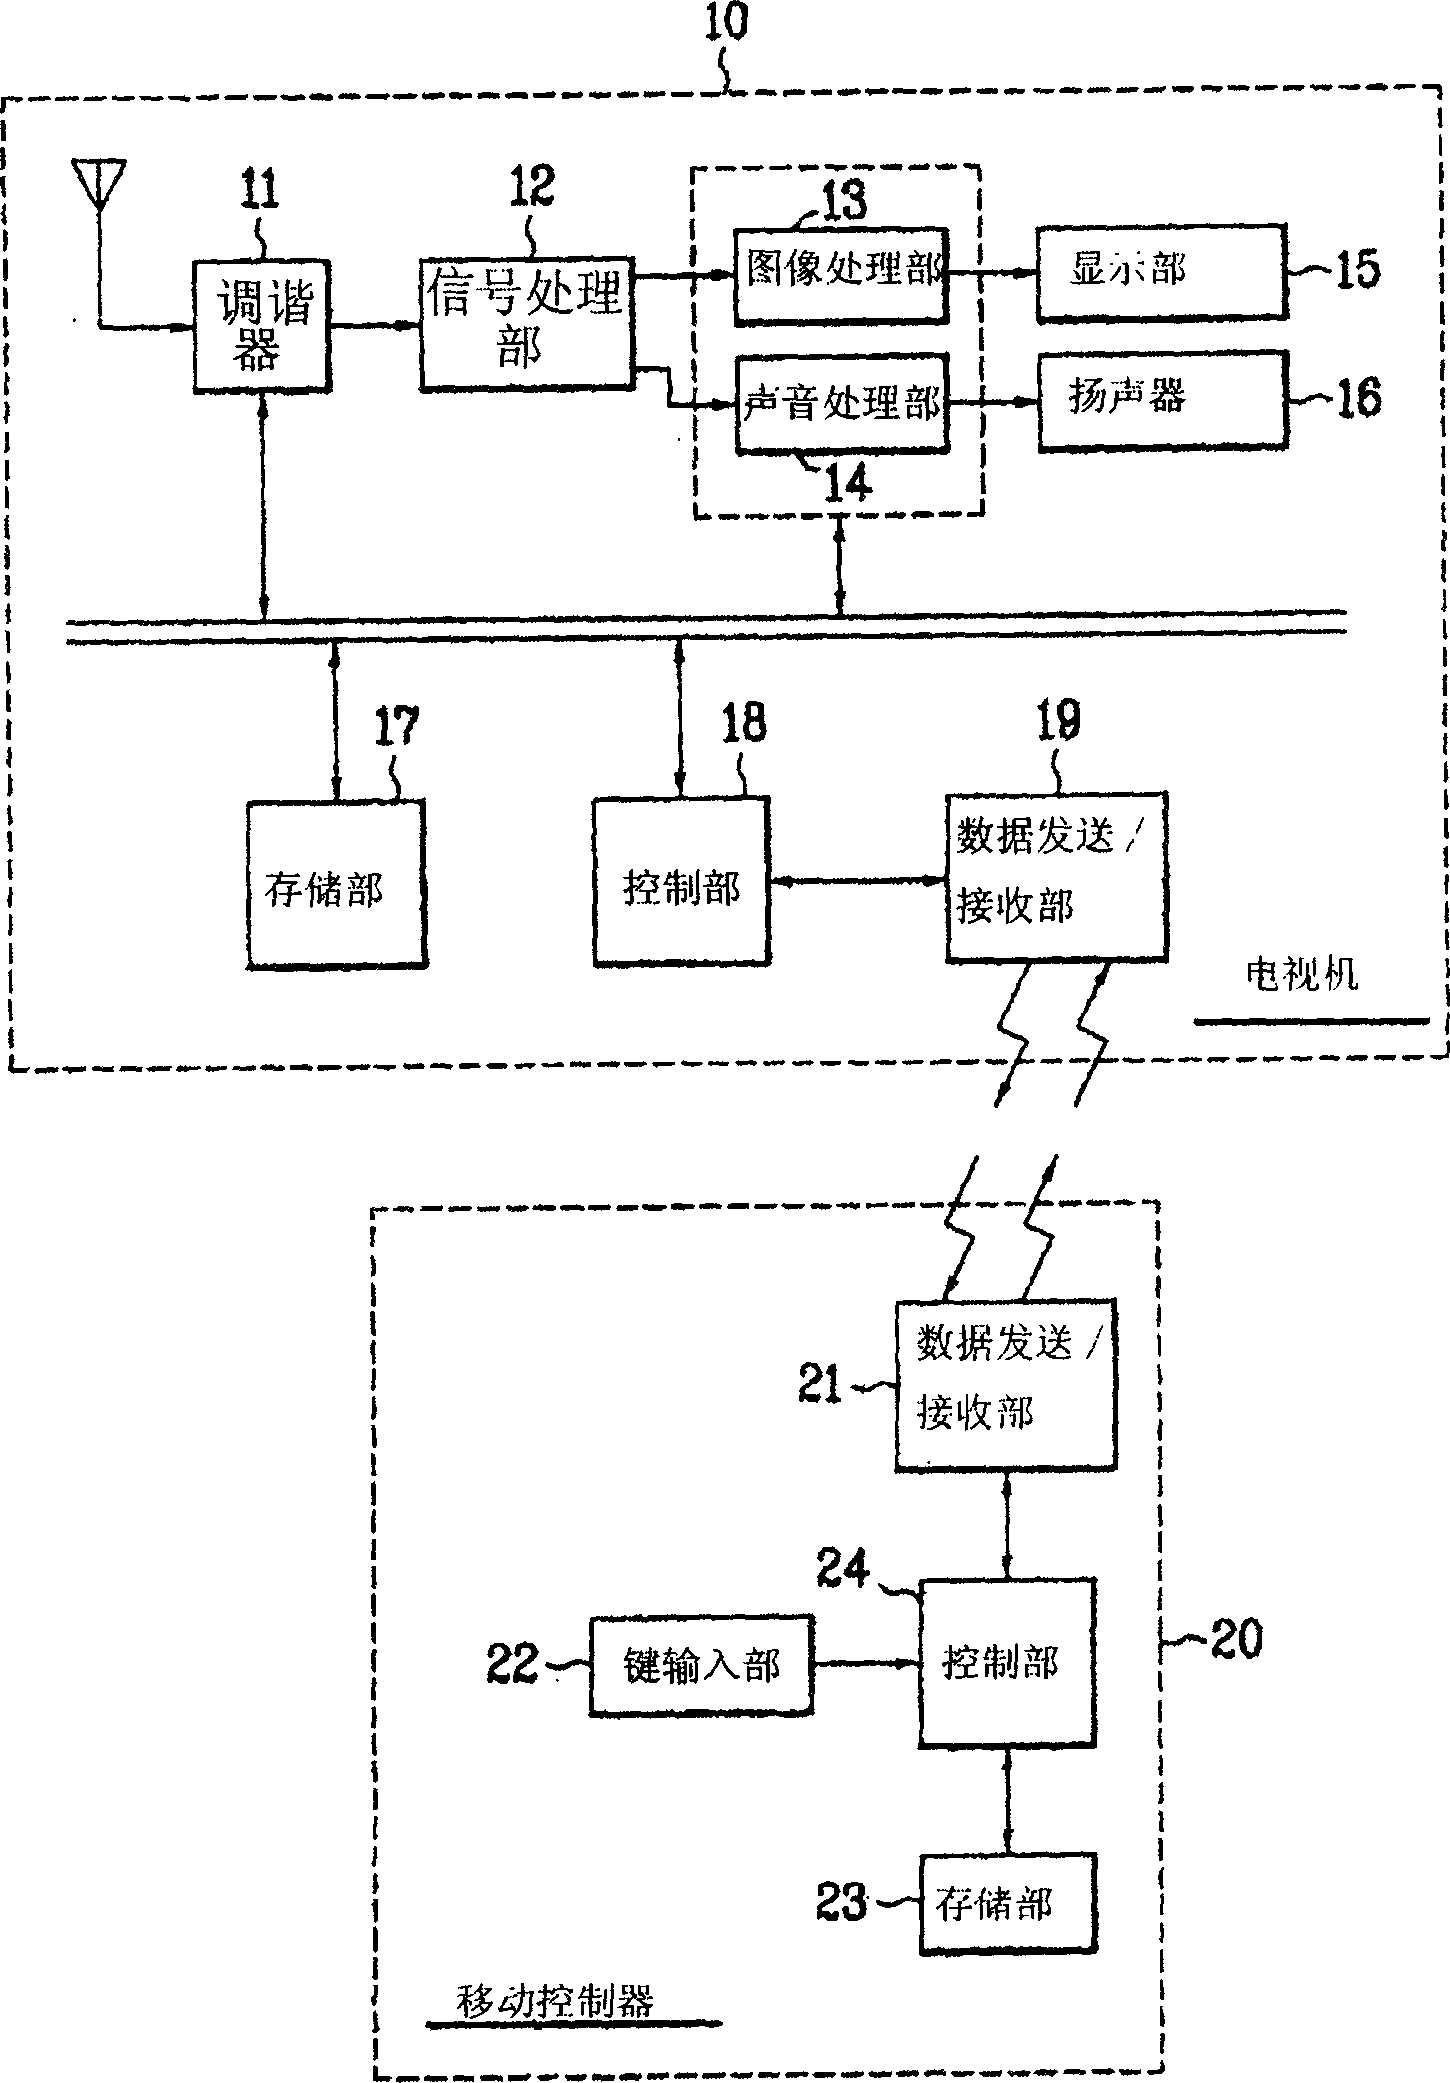 Remote control apparatus and control method for image devices